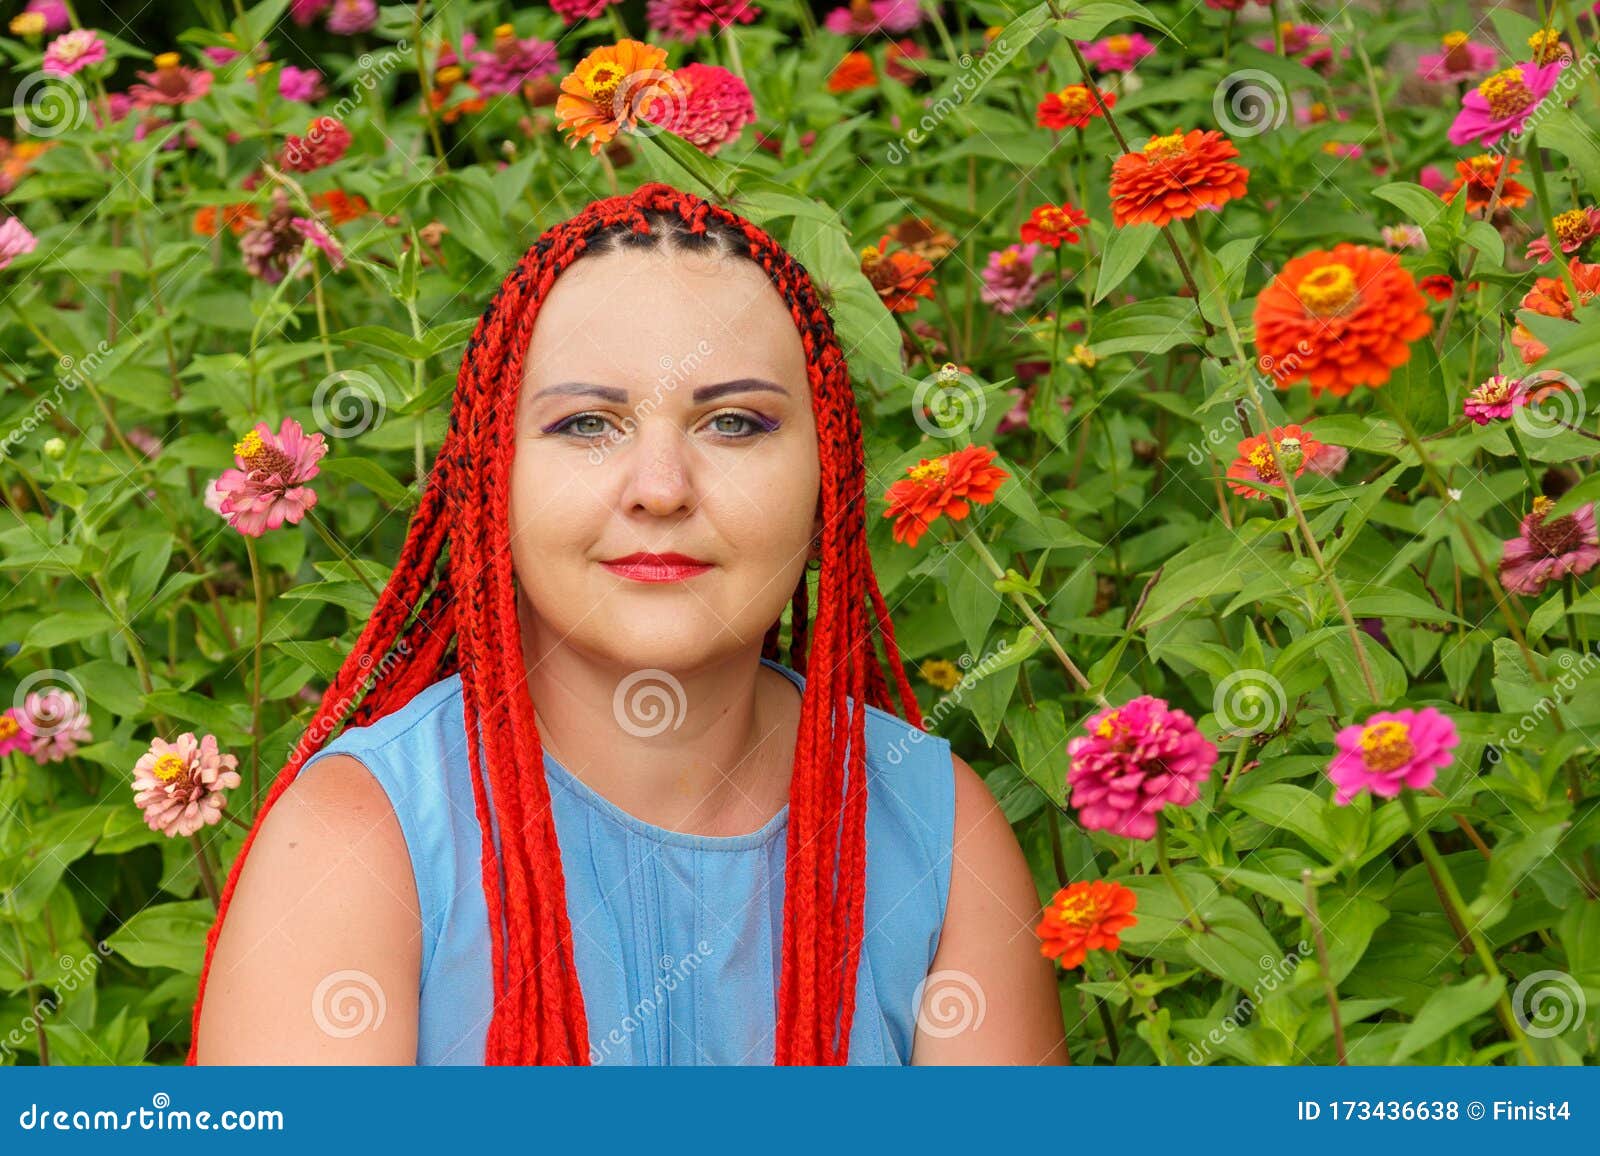 closeup of a young woman with red hair among red orange flowers.